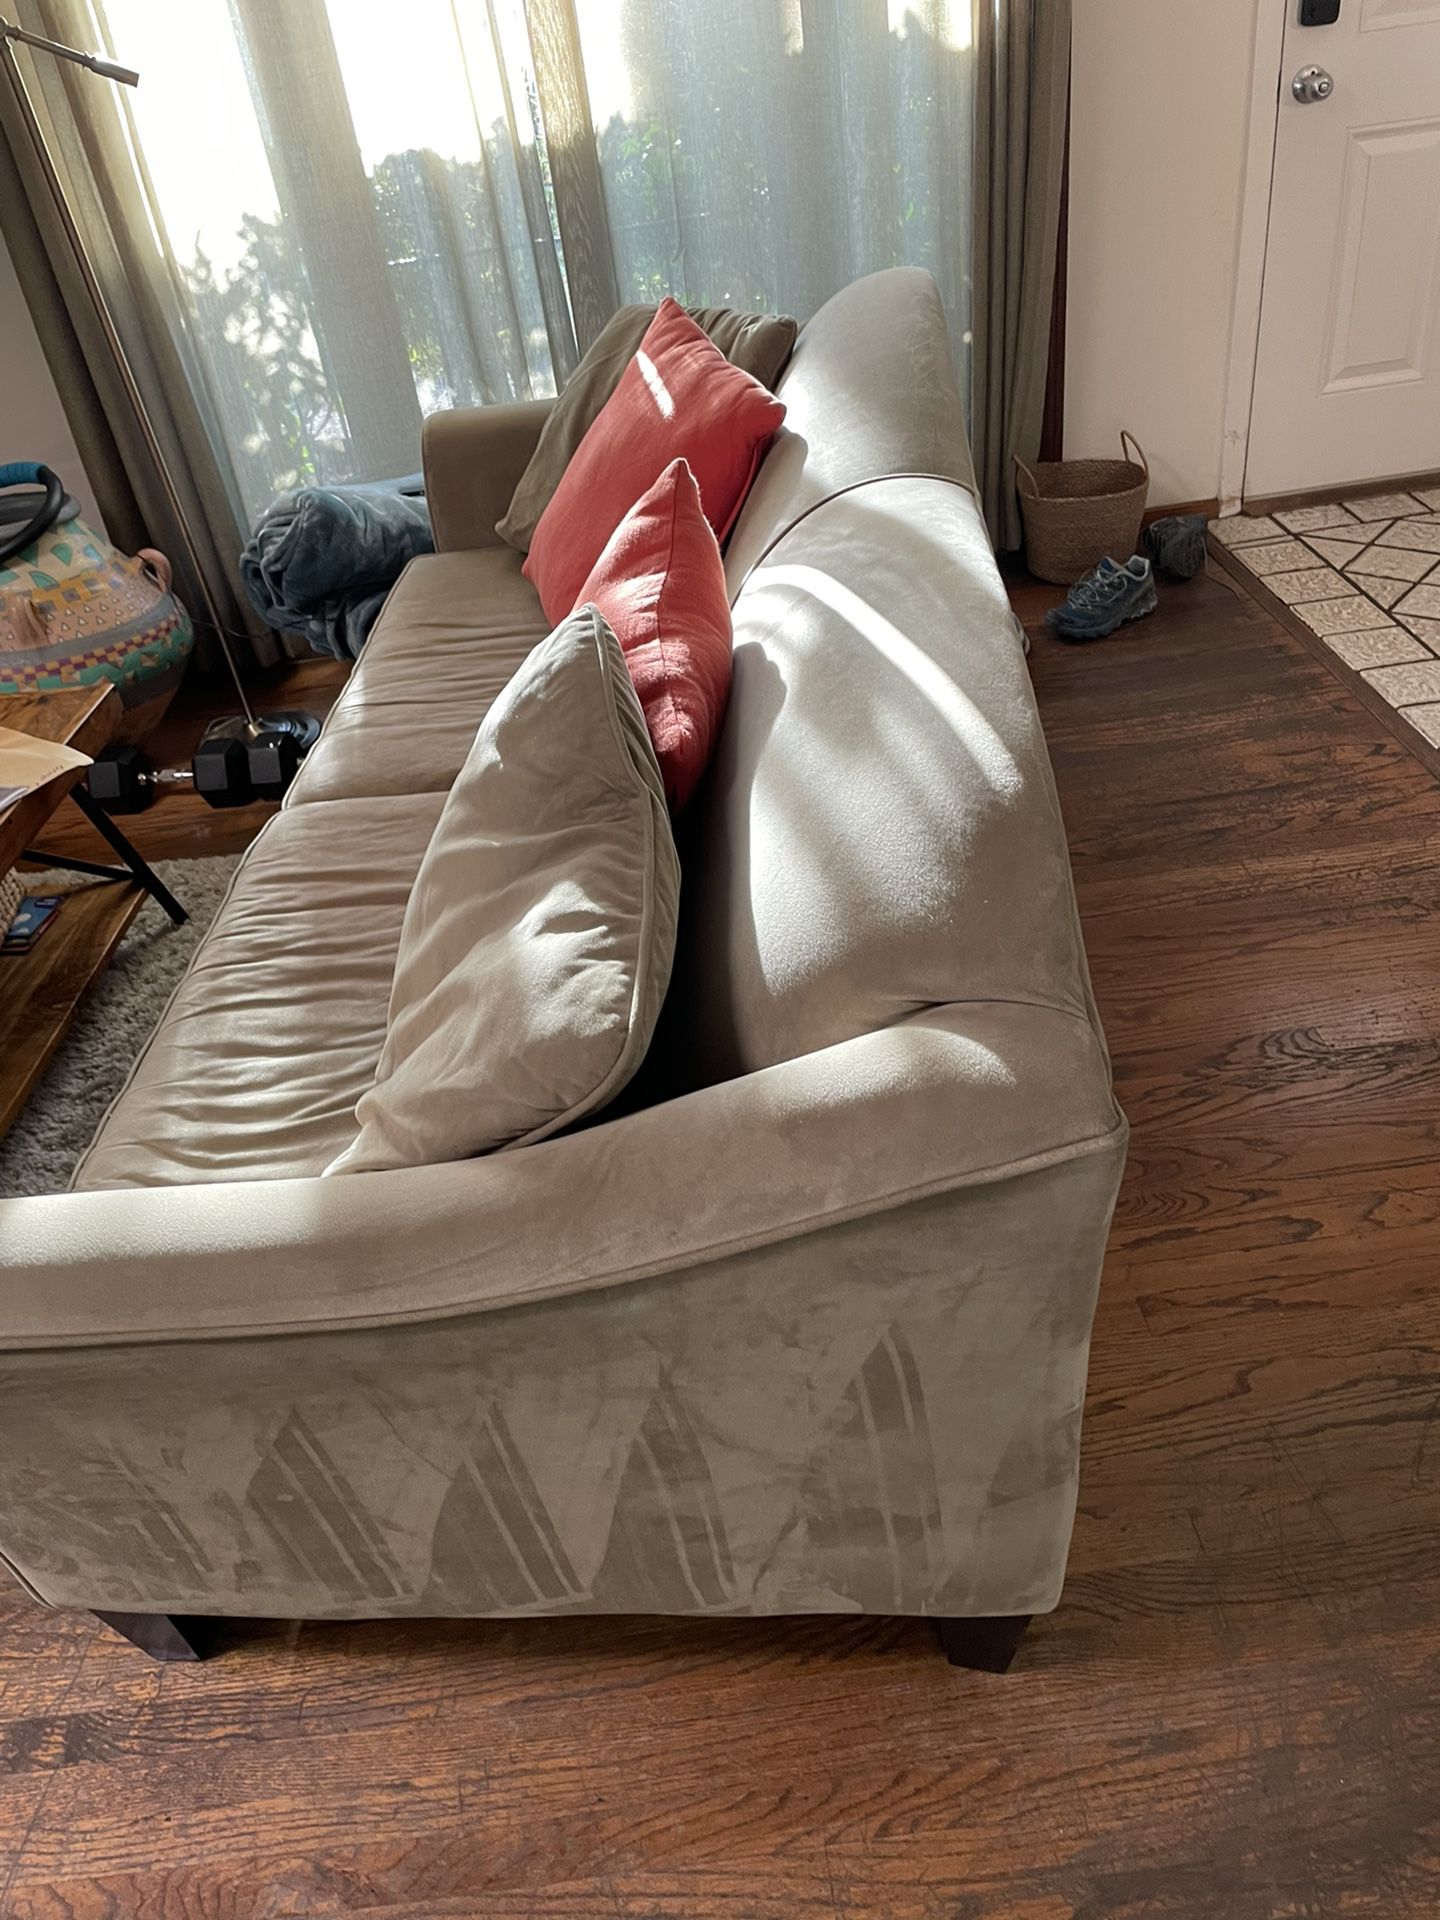 Grey Couch - Comfortable And Good Condition!